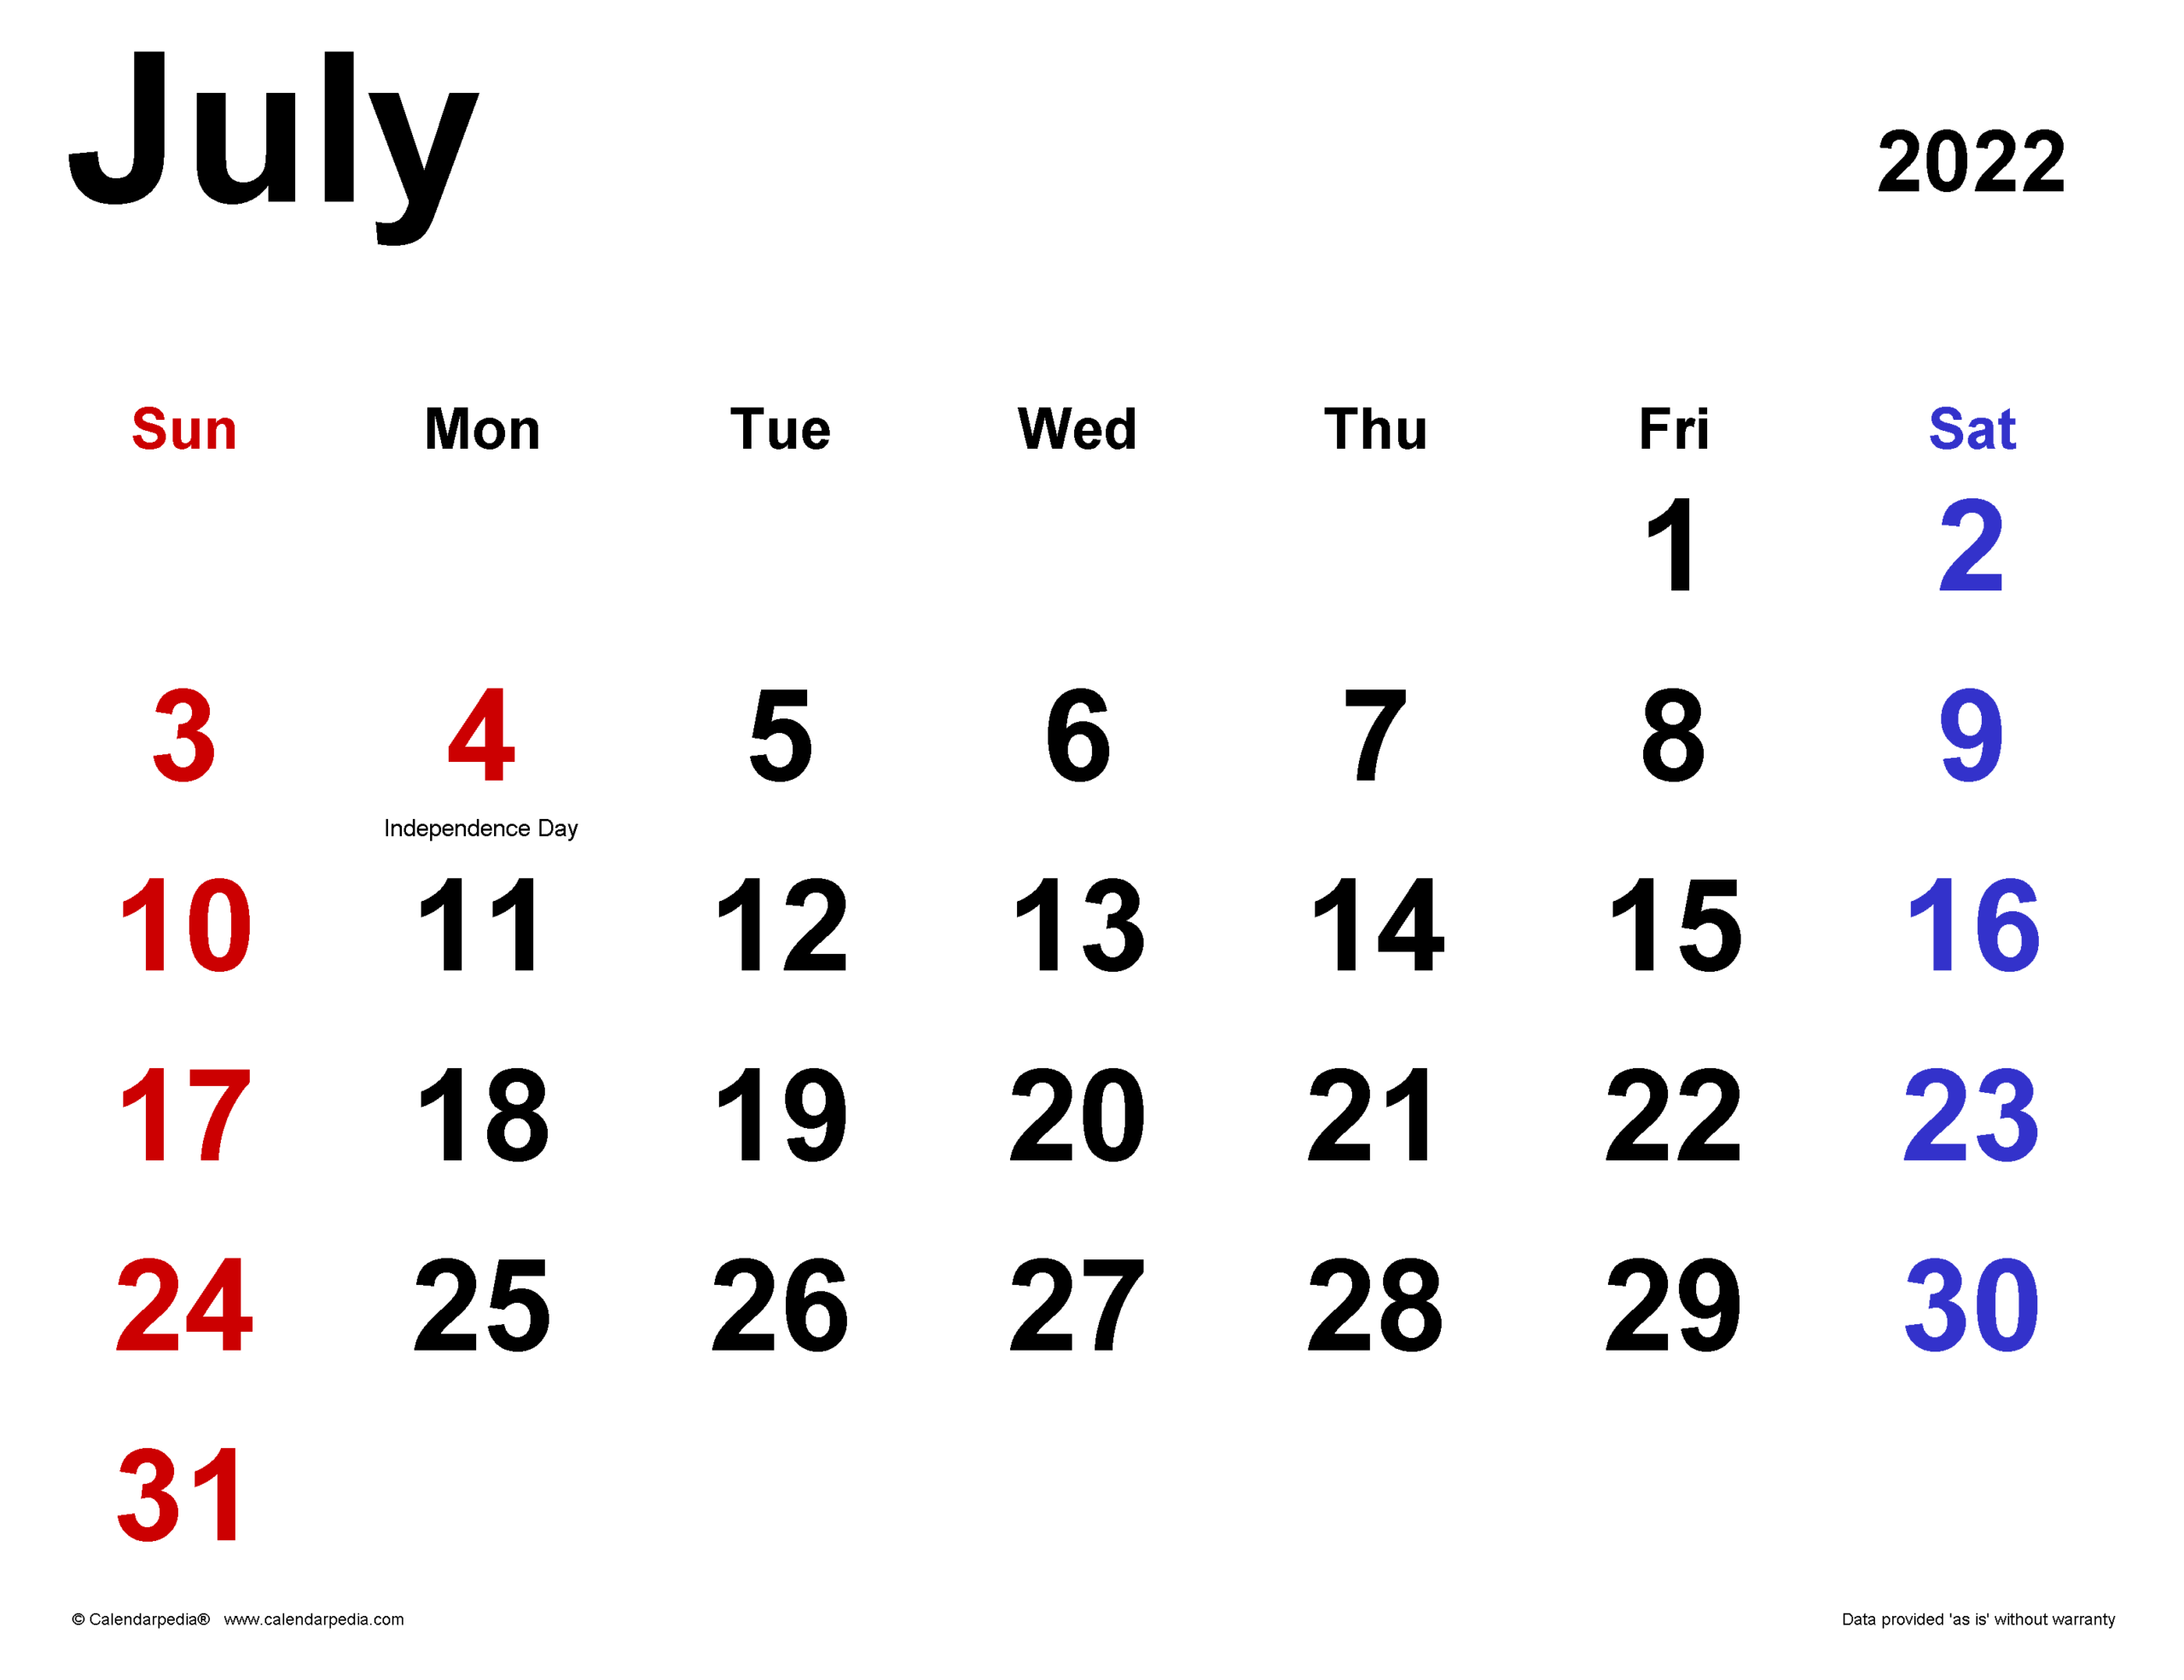 July 2022 Calendar | Templates For Word, Excel And Pdf